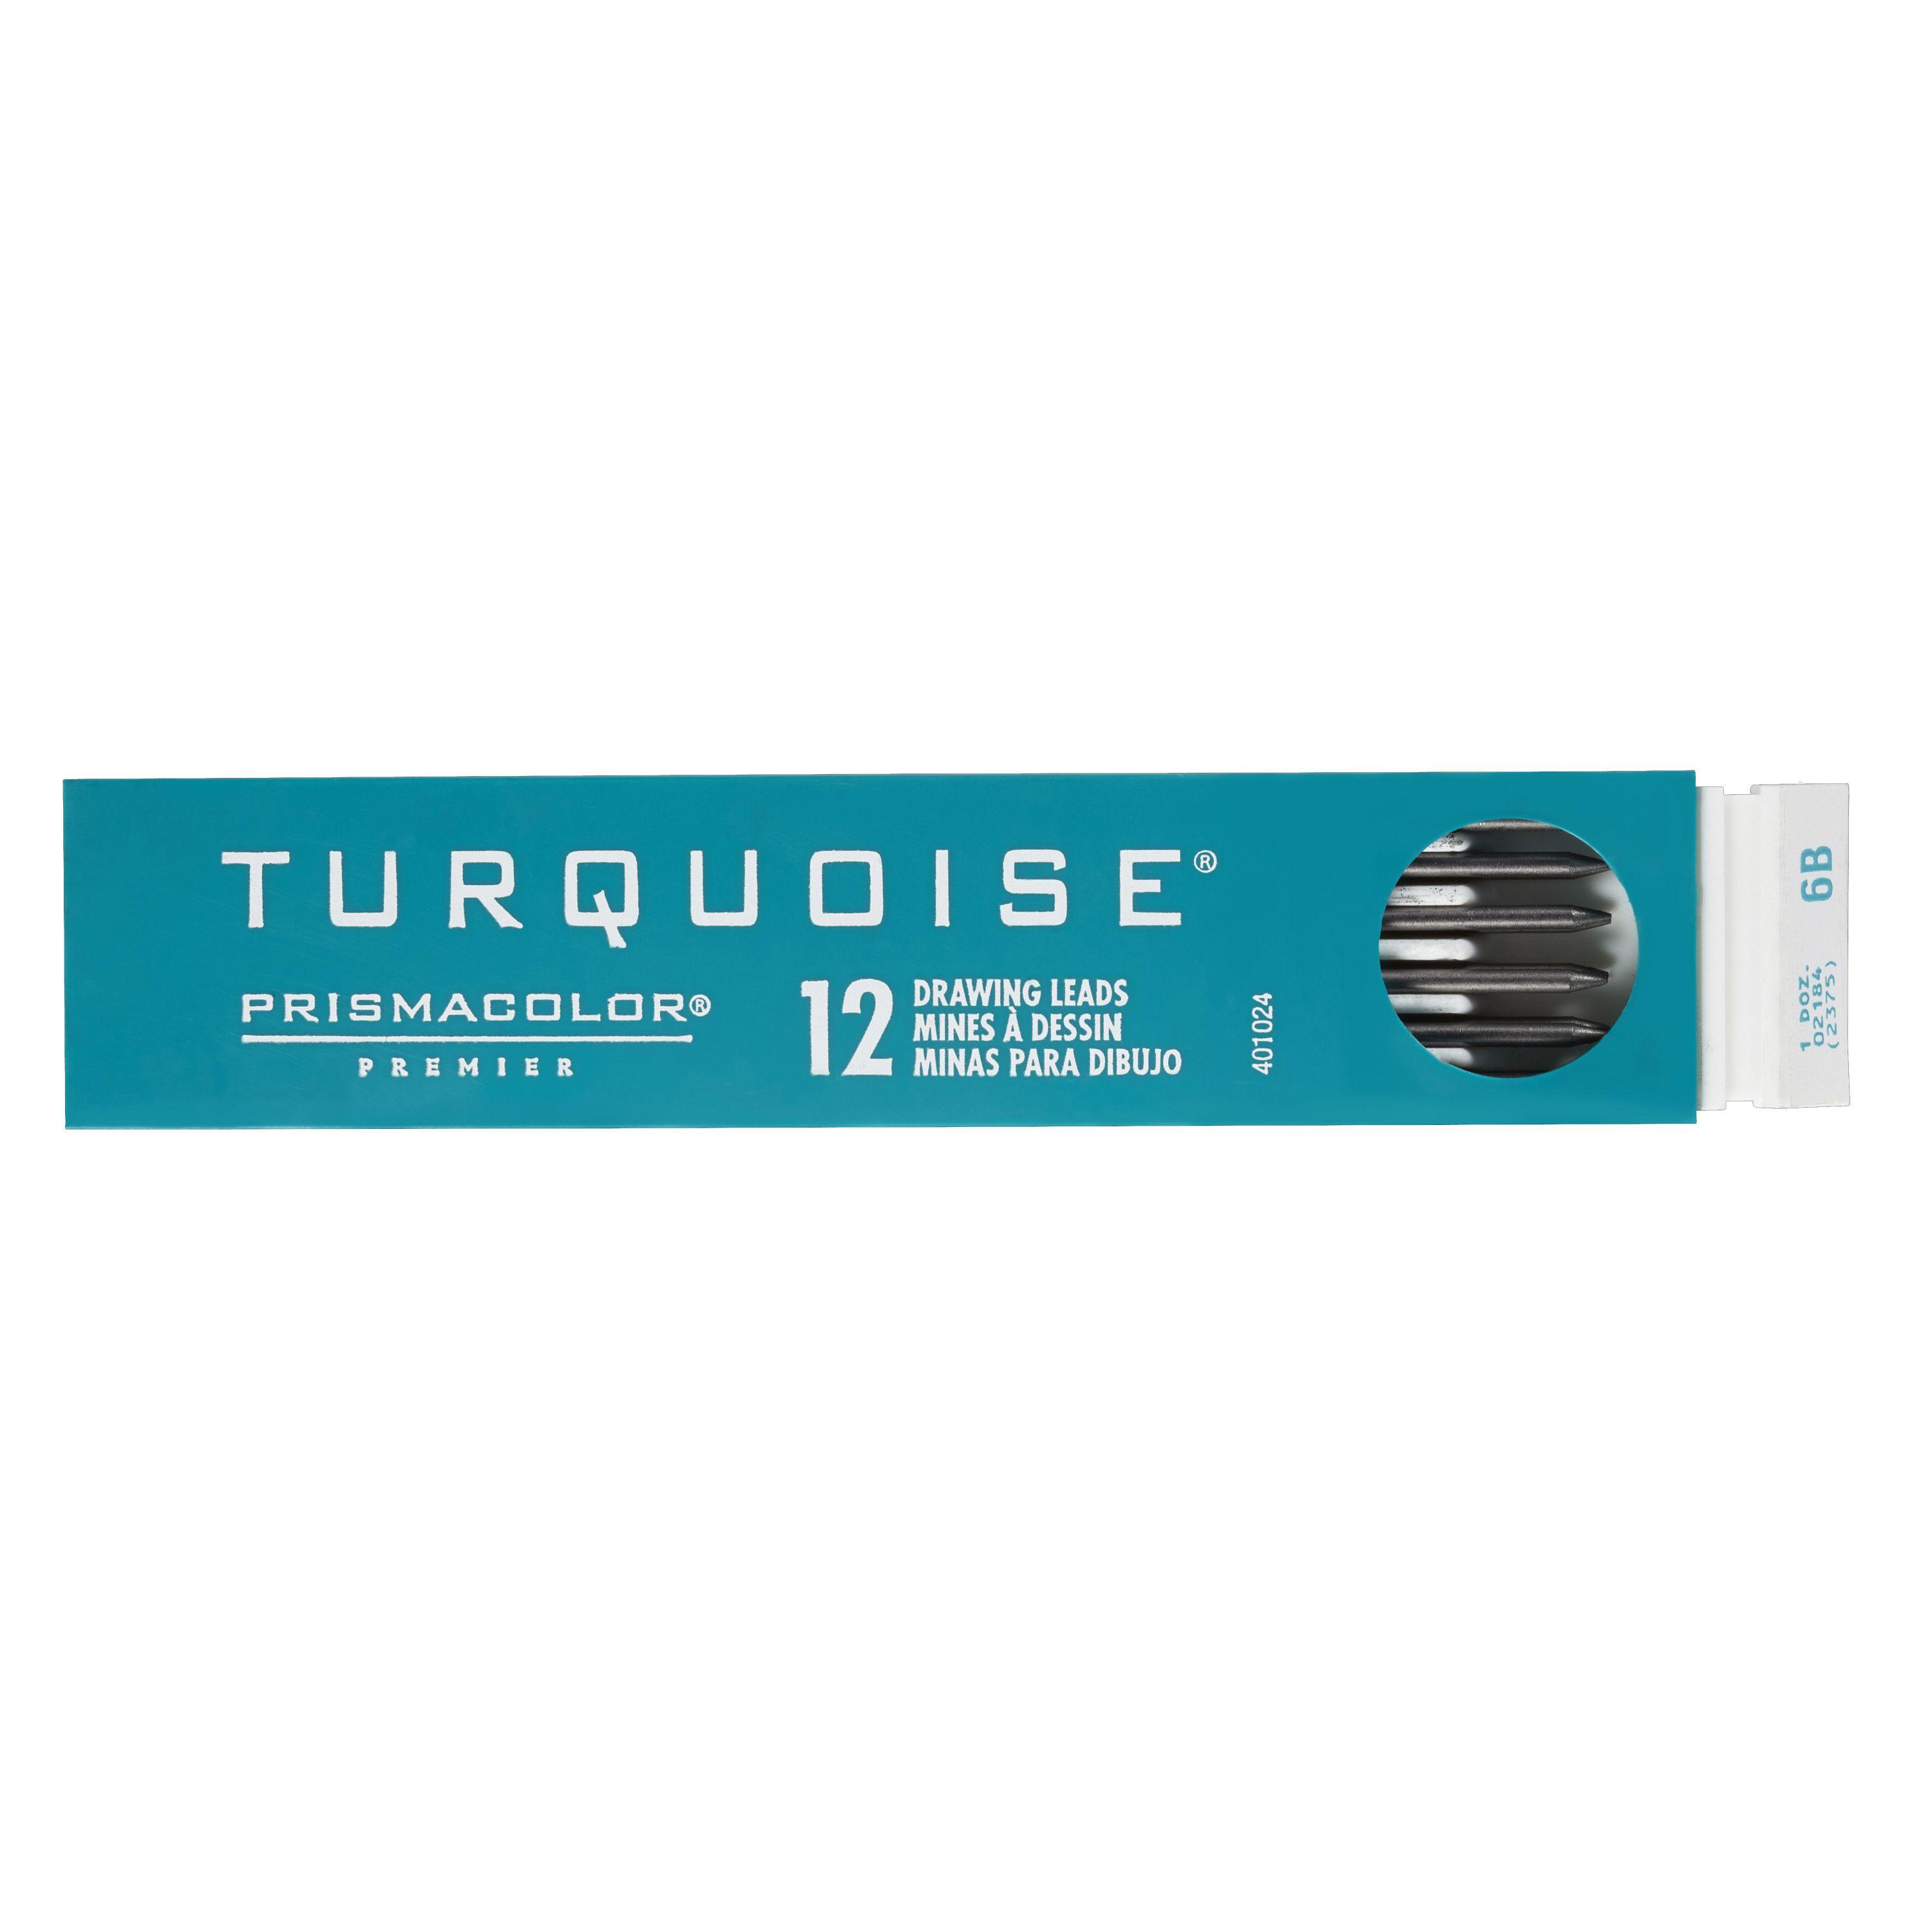 Prismacolor Logo - Prismacolor Turquoise Drawing Leads